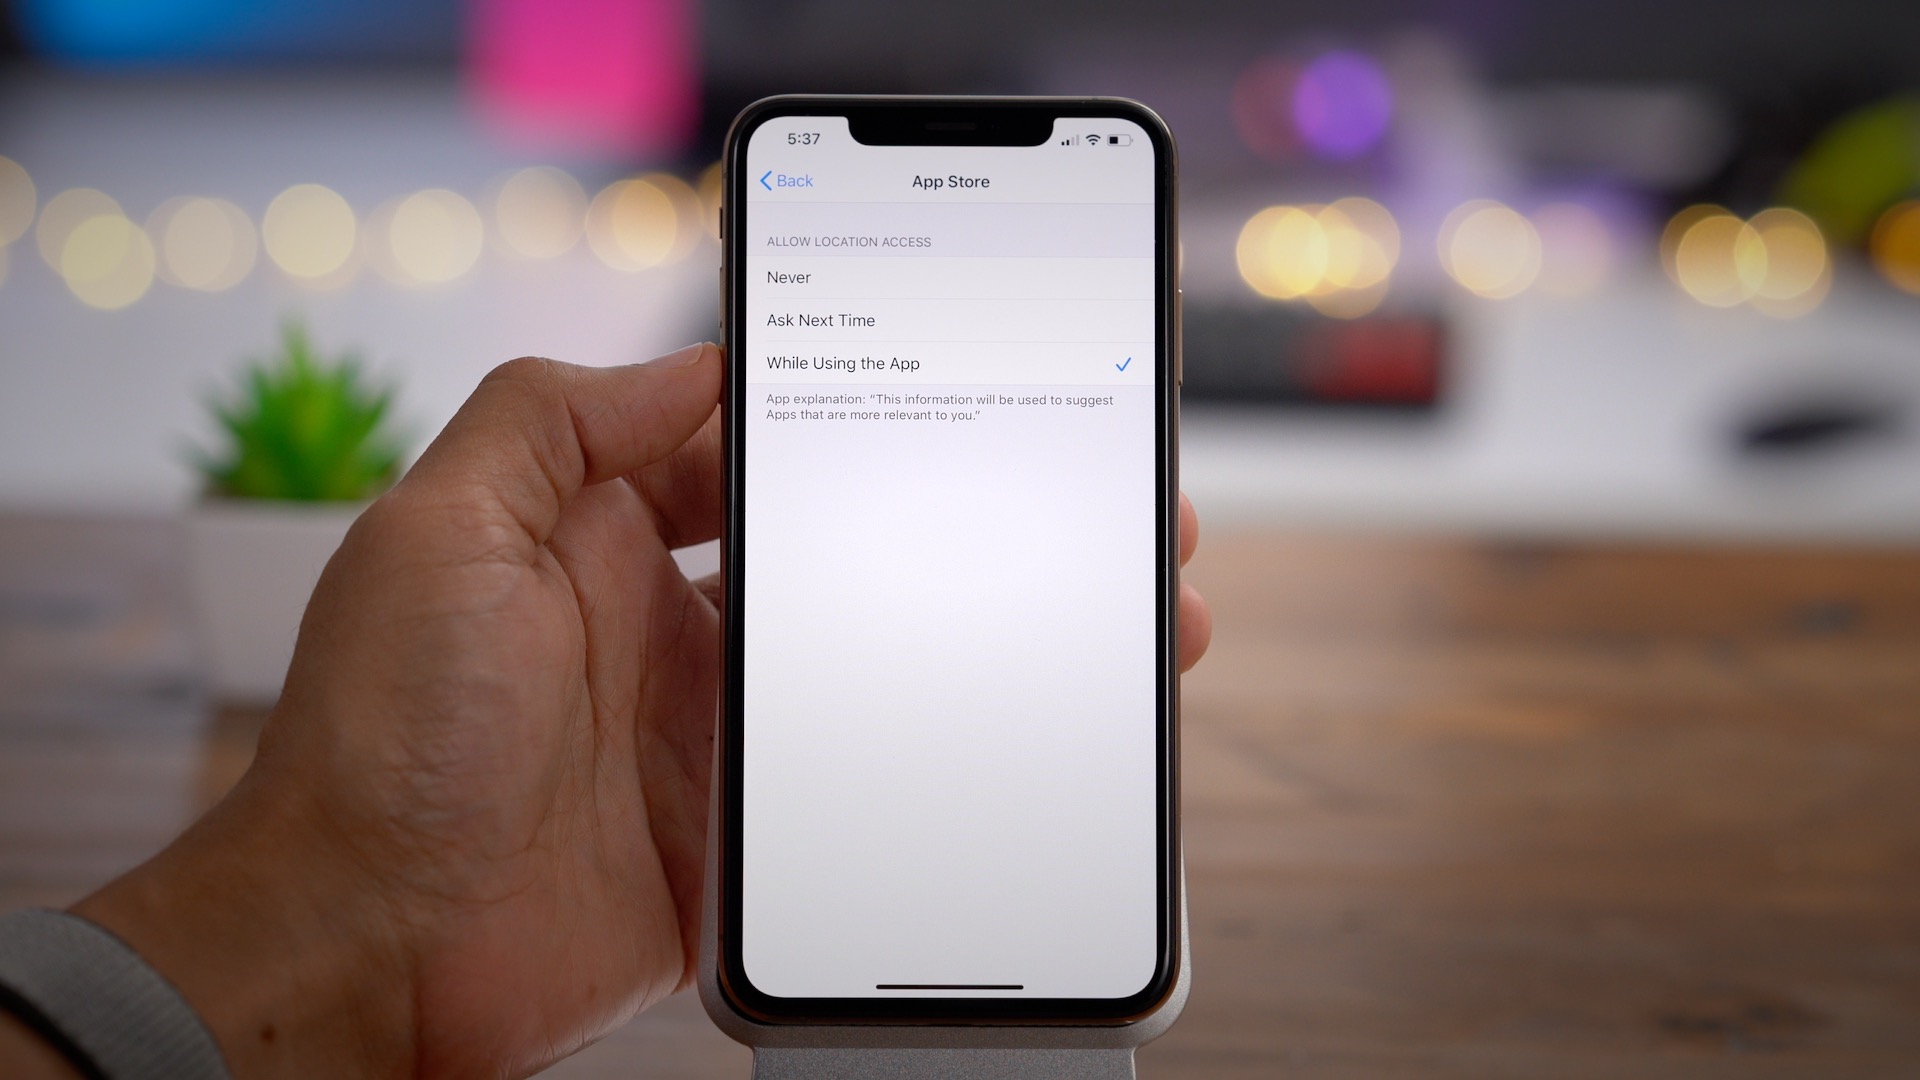 iOS 13: Hands-on with the top new features and changes [Video]